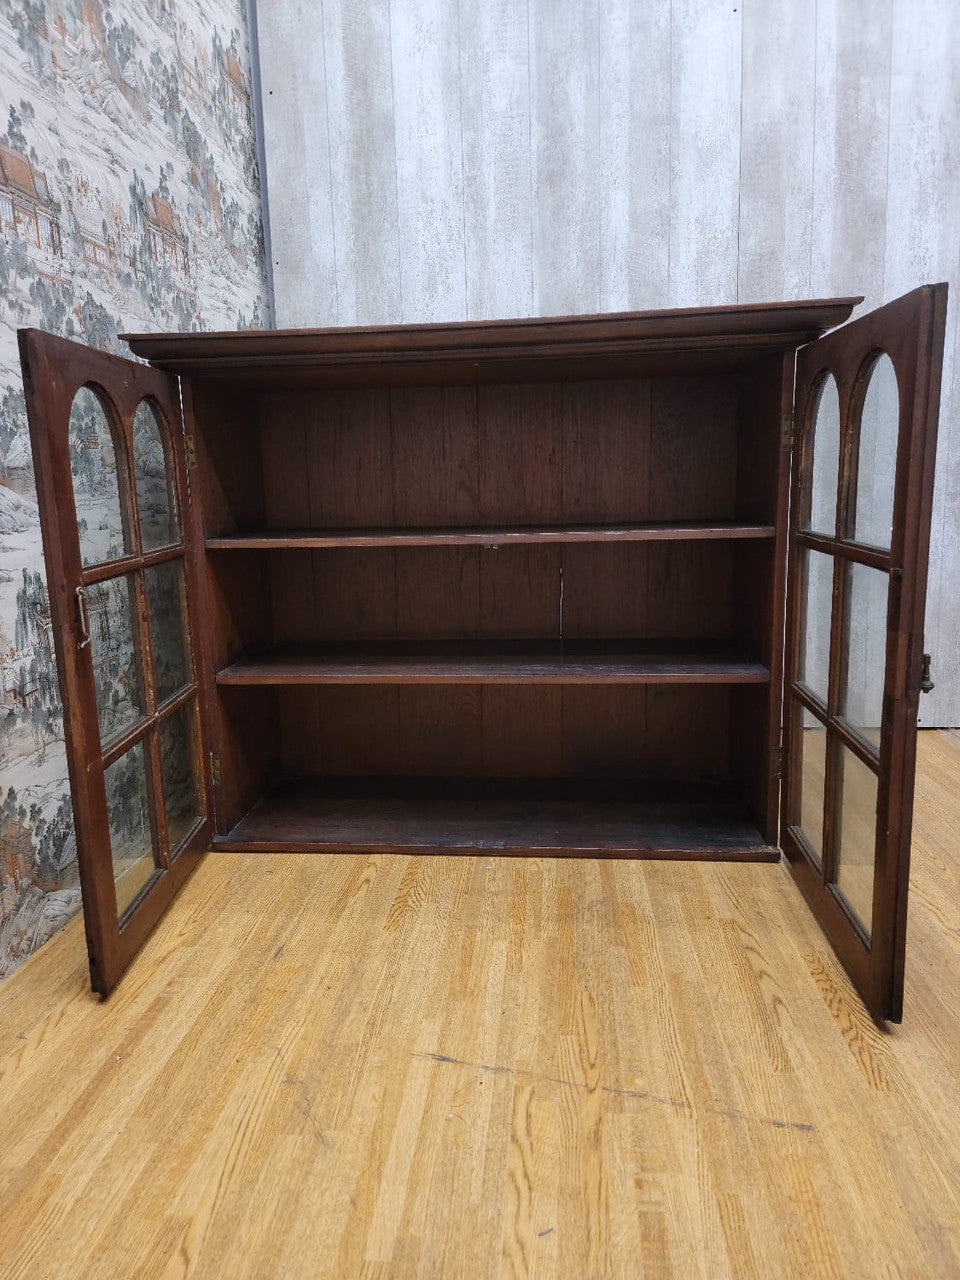 Antique Thai British Colonial Teak and Glass Display Cabinet/Bookcase